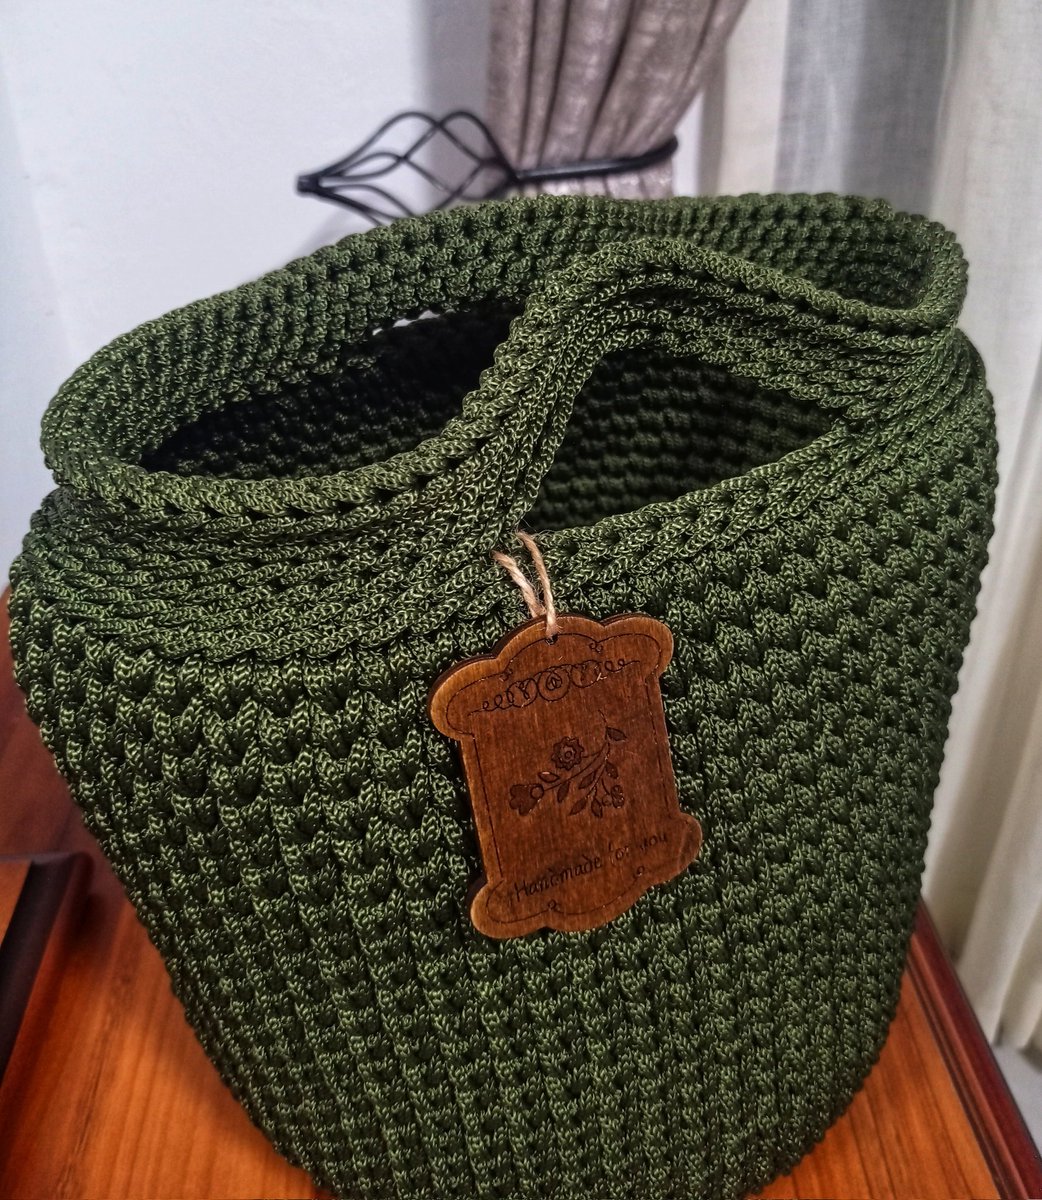 Each time I make this bag, I silently wish Mai Sue were still around to gush about her eldest child & have a proud mommy moment. I am in awe of this gift, I will use it wisely.

#crochet
#mothersdaygifts